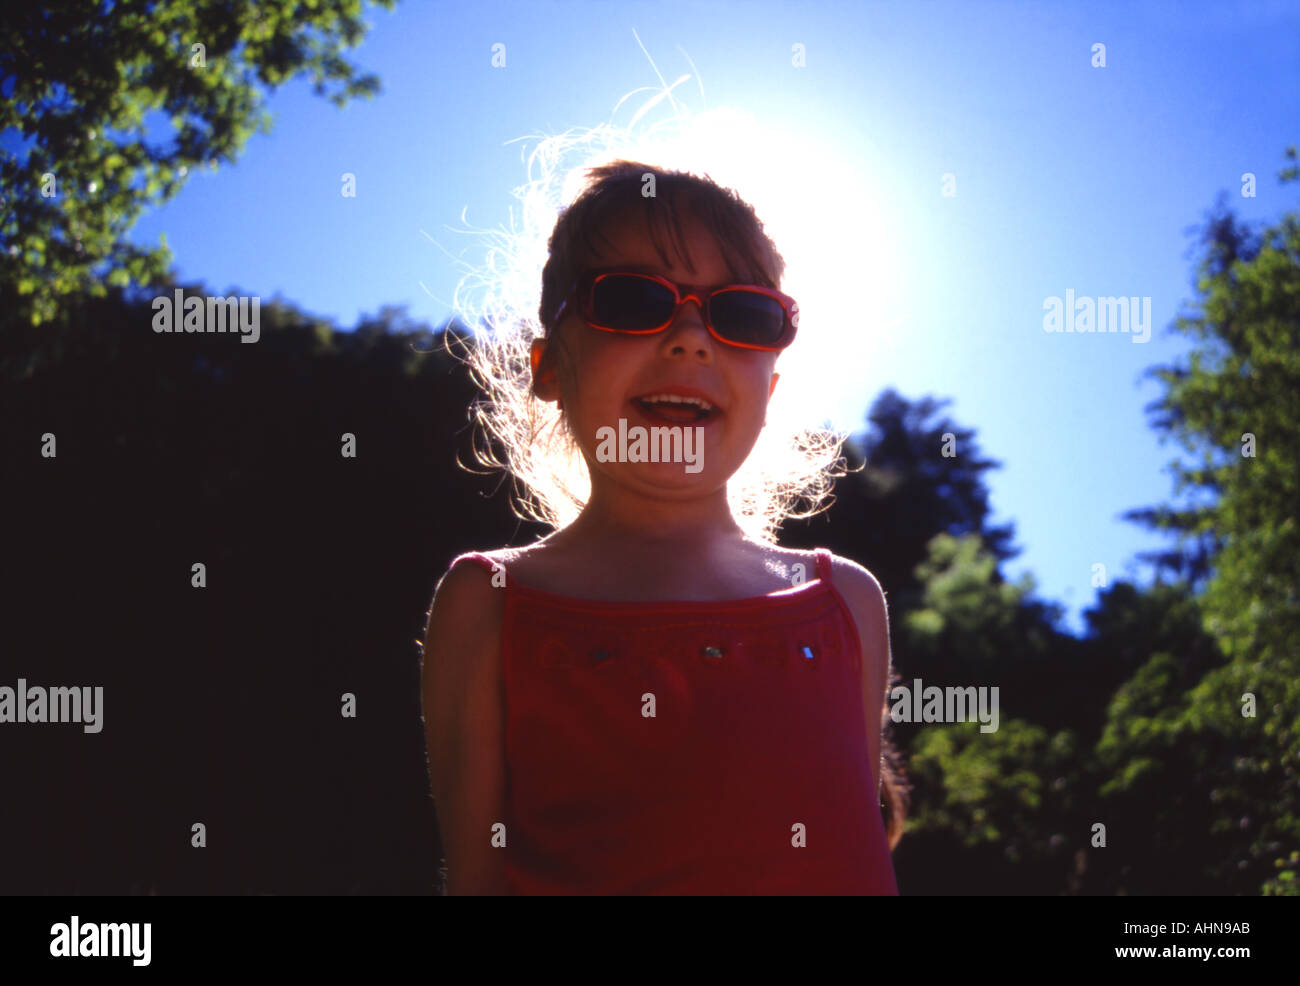 Girl smiling in sunglasses with the sun behind her creating a halo effect Stock Photo